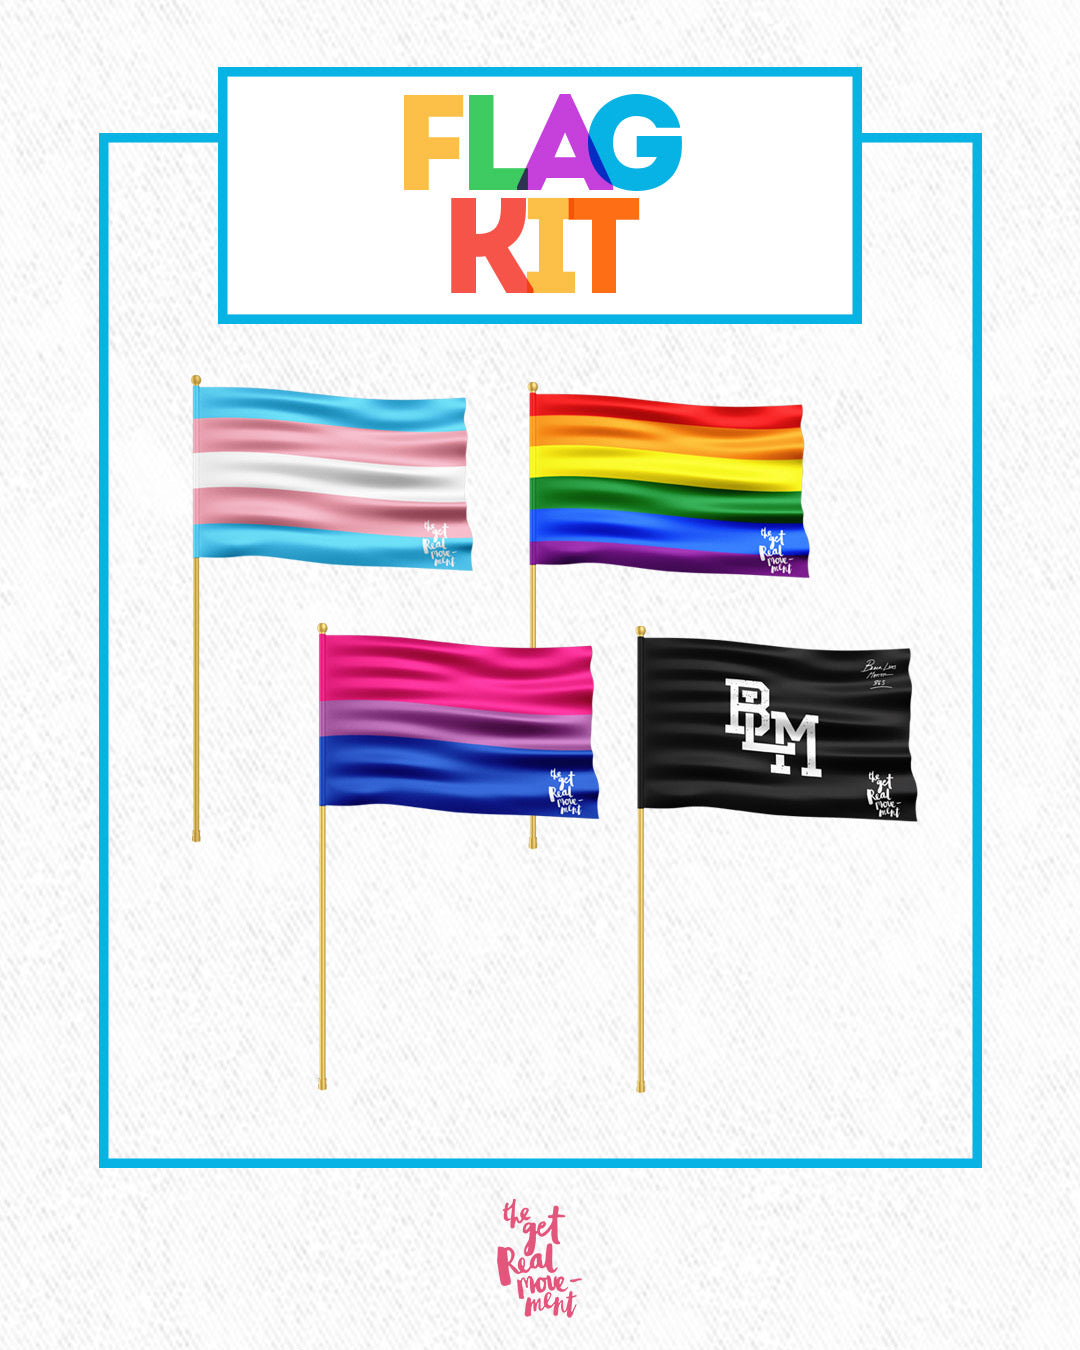 Digital poster of an open box with the four flags. The title of the poster is at the top centre "Flag Kit".